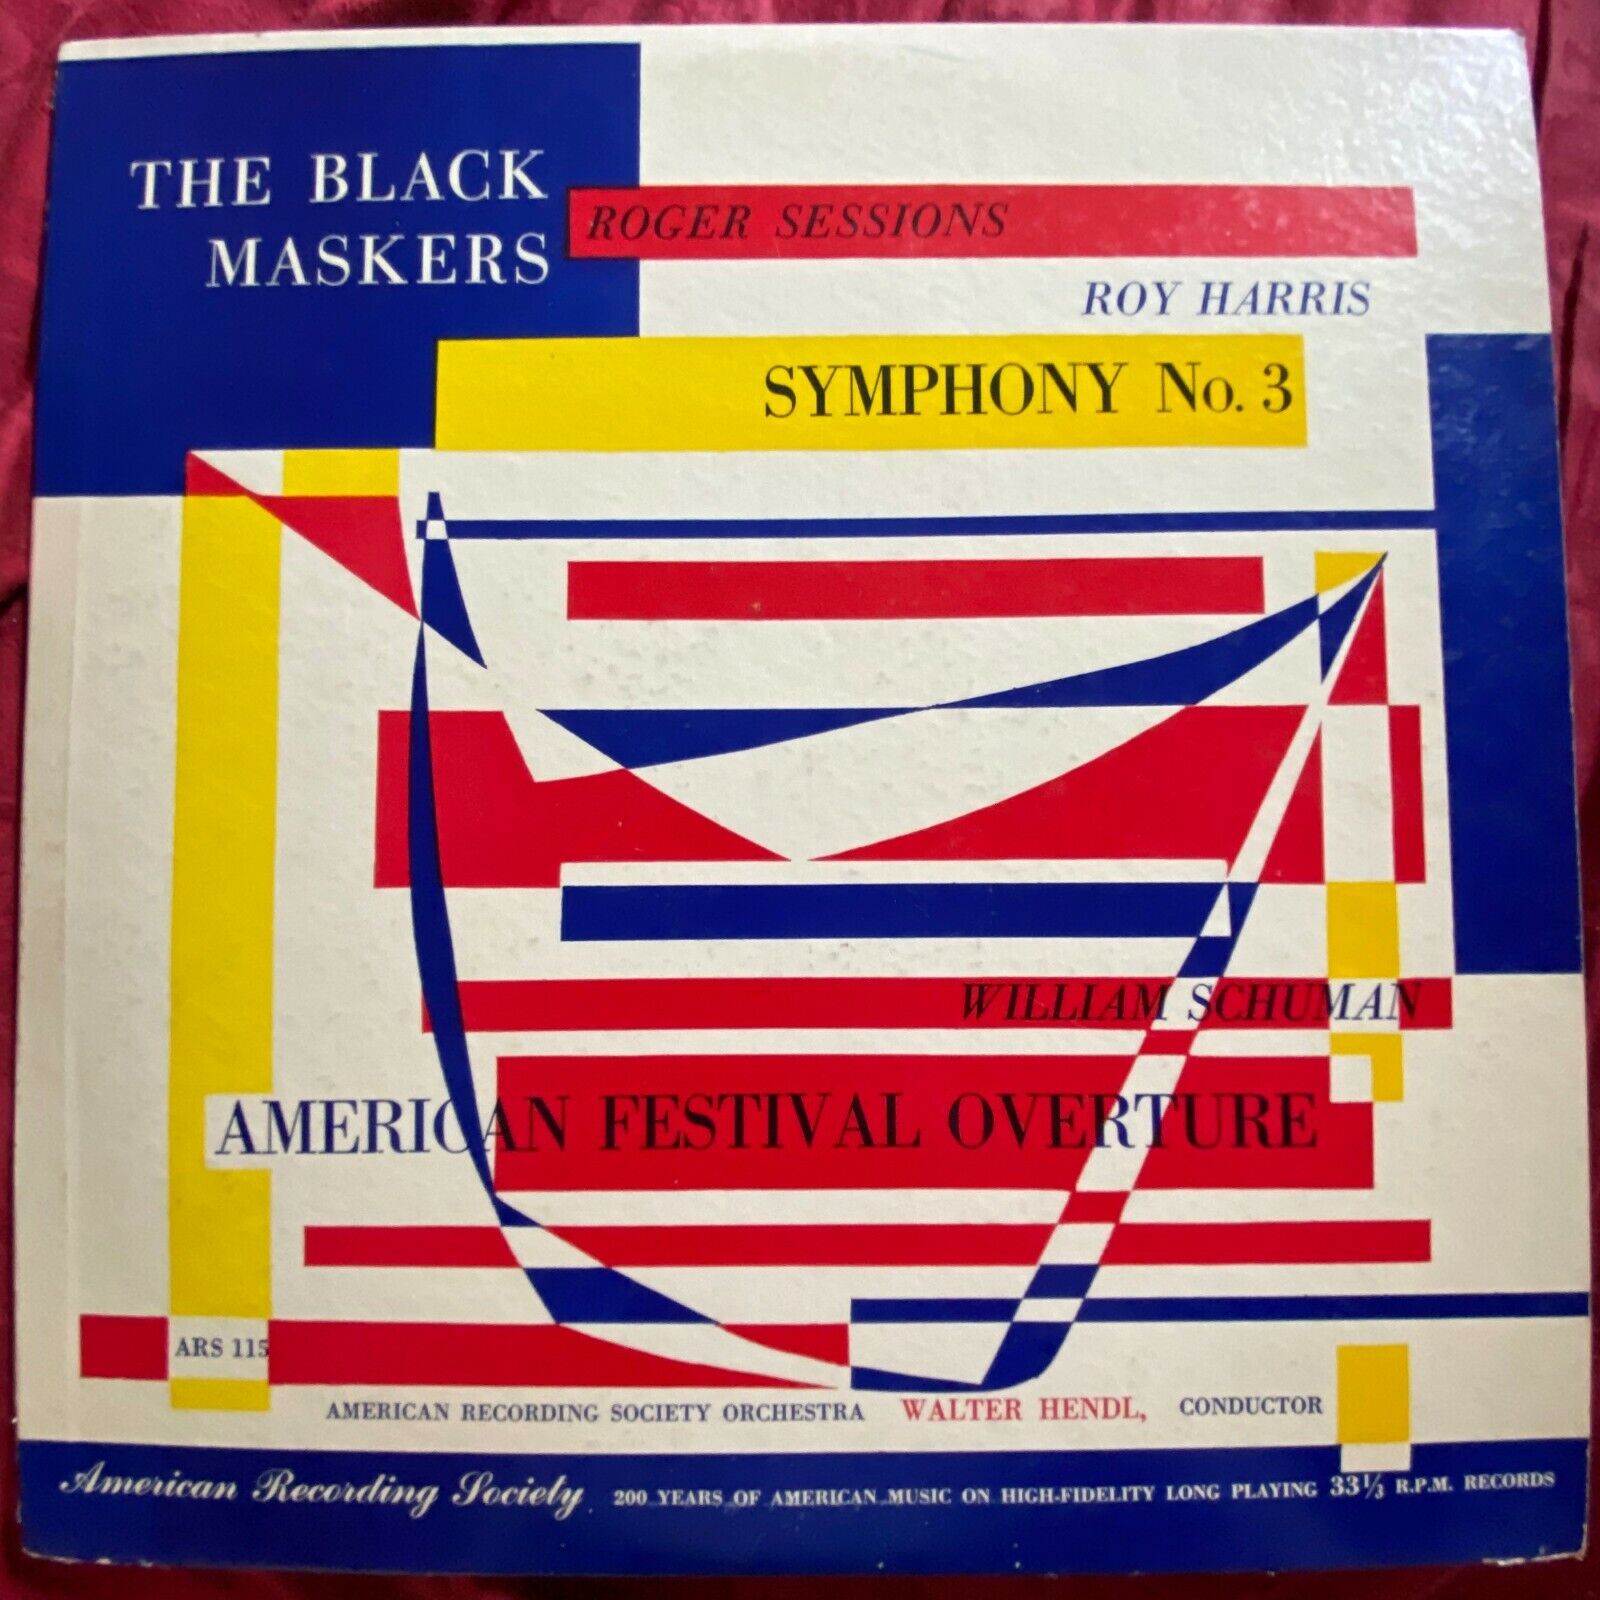 The Black Maskers~Sessions~Harris~Schuman~Orchestra~1953 American Recording LP